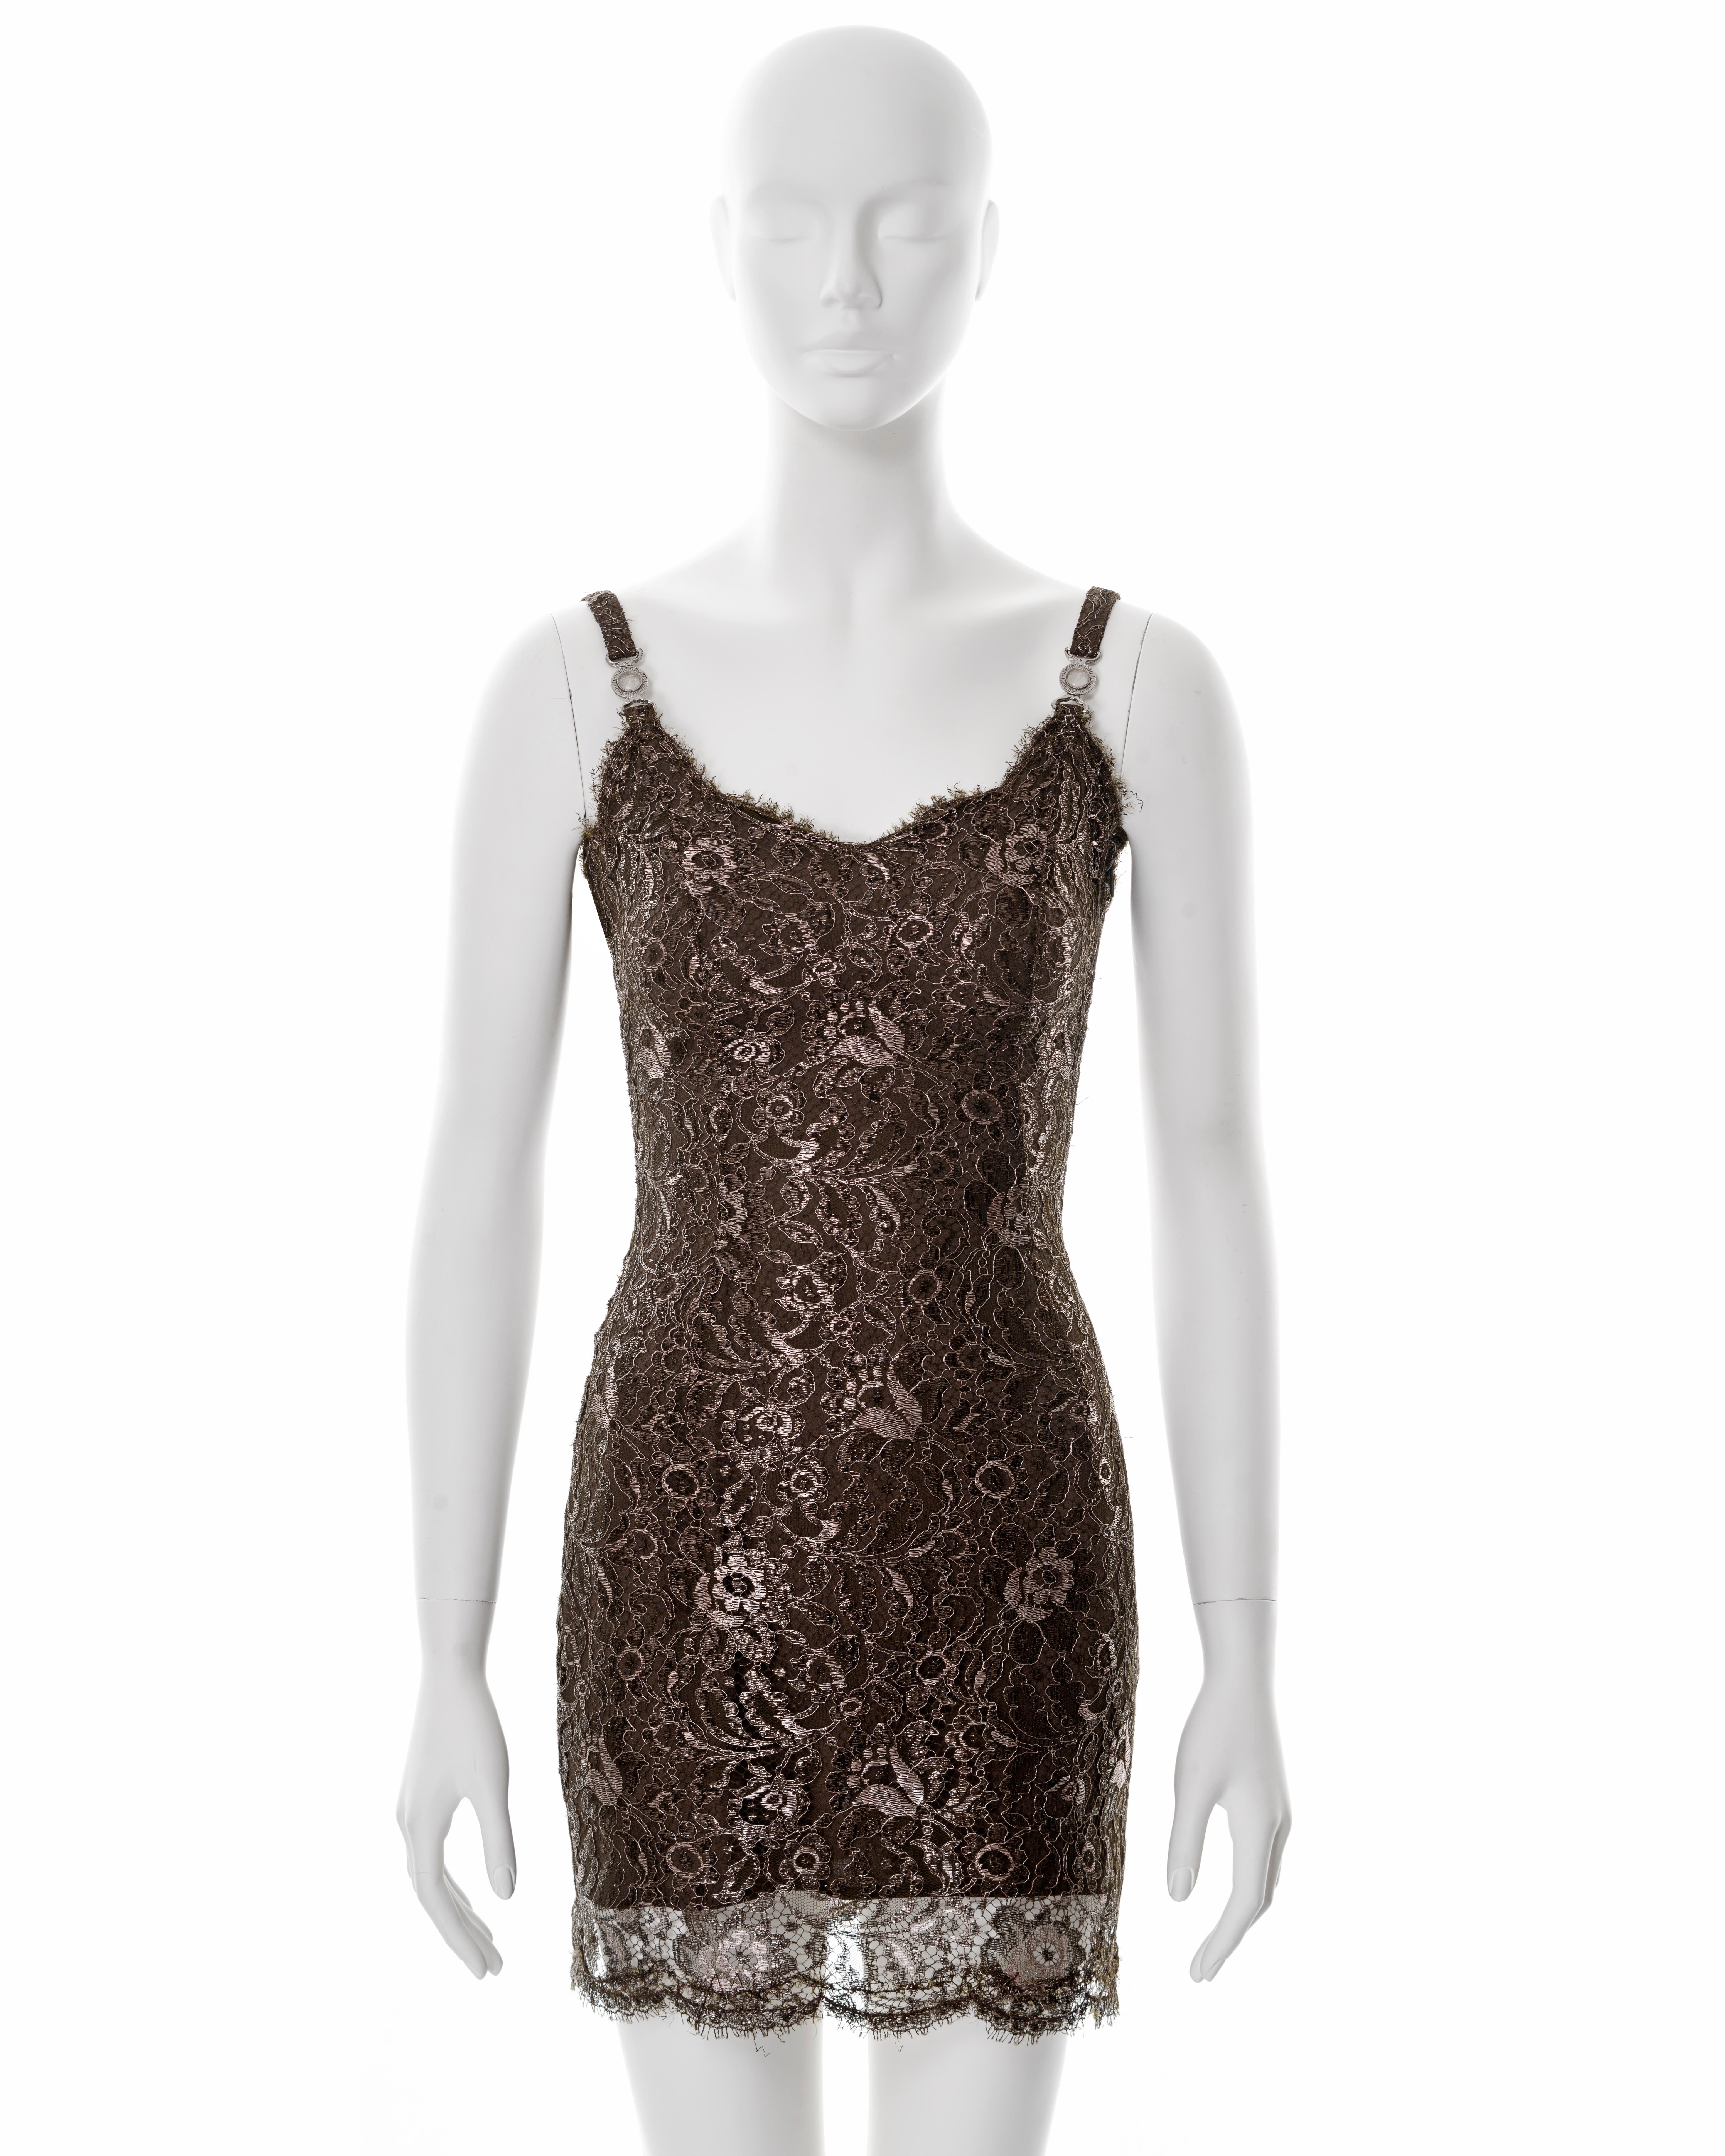 ▪ Gianni Versace evening mini dress
▪ Sold by One of a Kind Archive
▪ Fall-Winter 1996
▪ Constructed from metallic brown lamé lace
▪ Scalloped edge 
▪ Four Medusa ornaments on shoulder straps
▪ Size zip fastening 
▪ IT 38 - FR 34 - UK 6 - US 2
▪